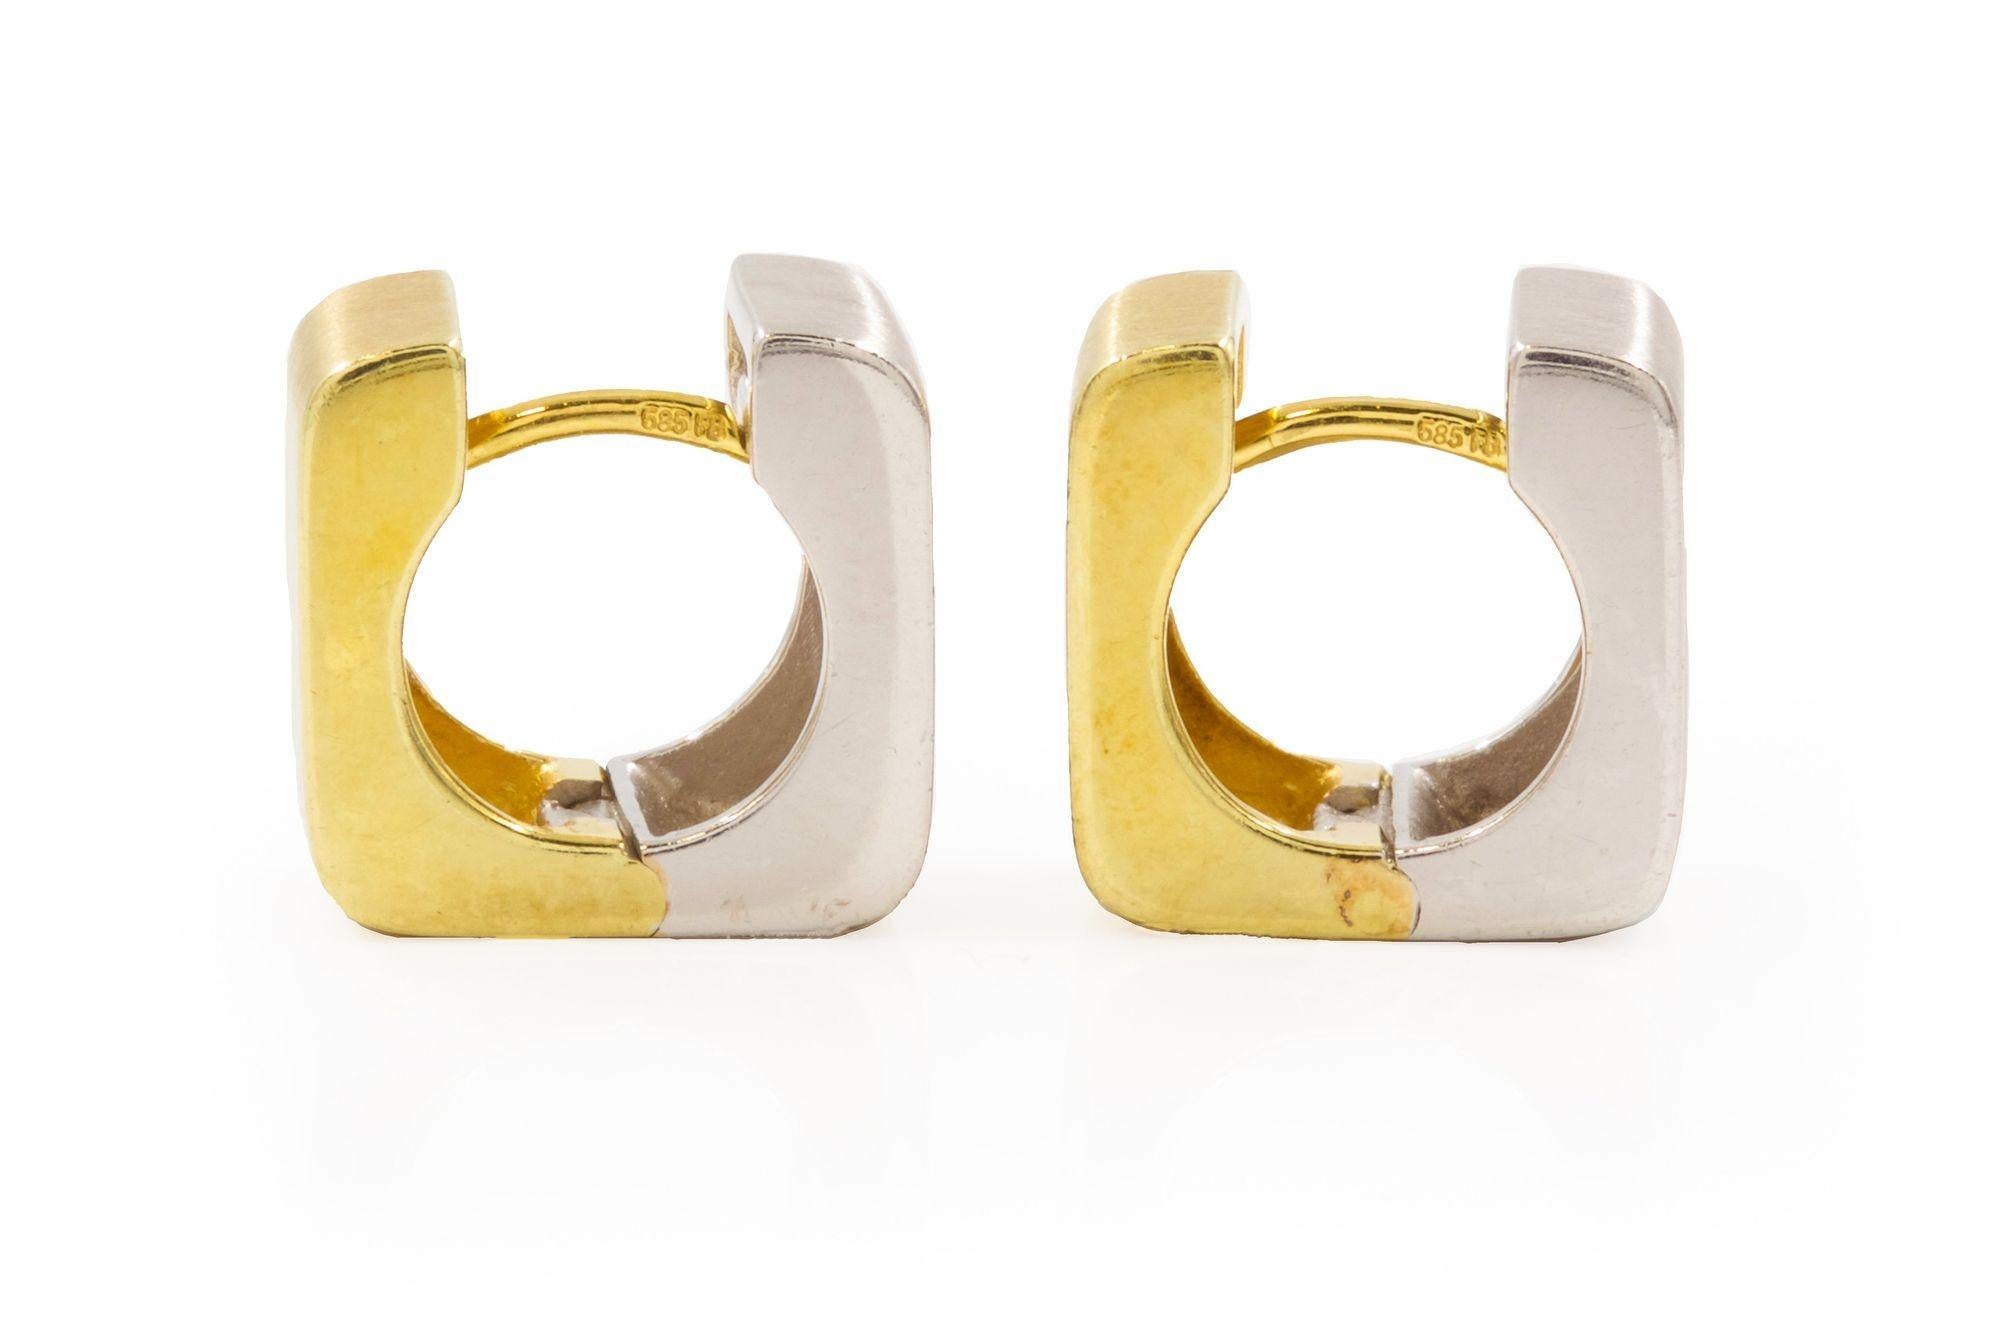 Contemporary Modern Pair of White-and-Yellow 14k Gold Huggie Earrings In Good Condition For Sale In Shippensburg, PA